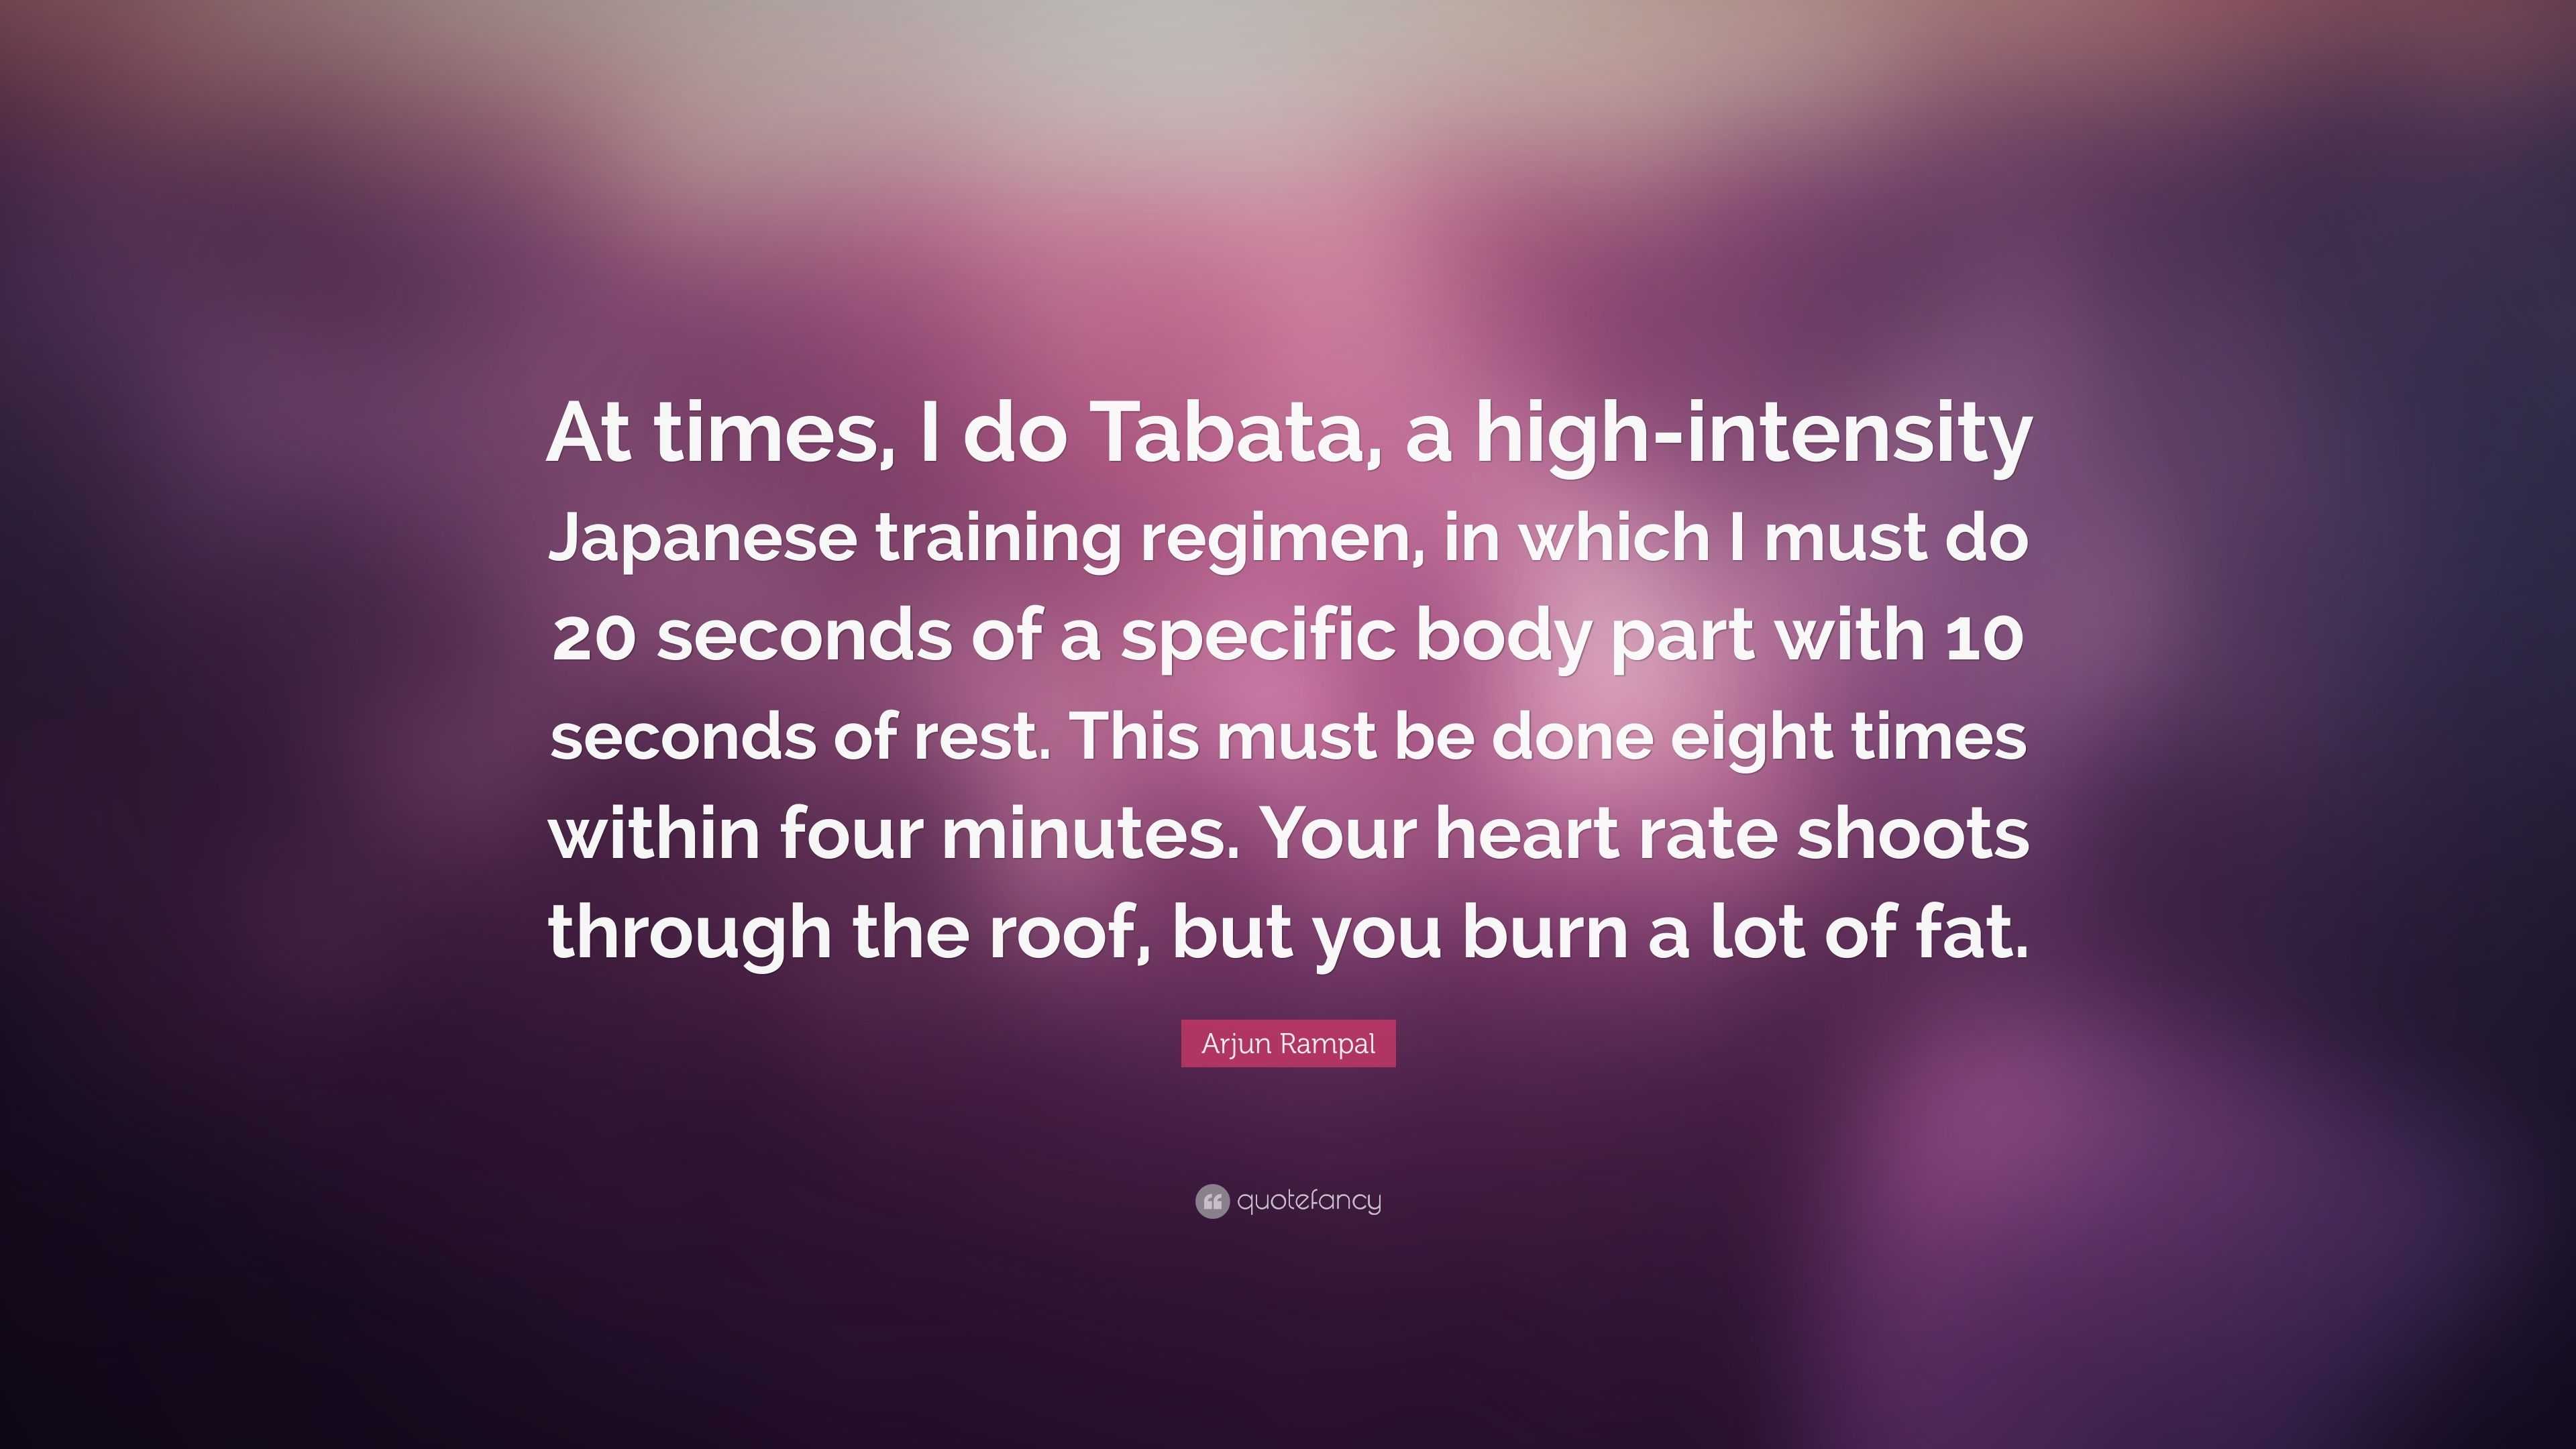 Arjun Rampal Quote “at Times I Do Tabata A High Intensity Japanese Training Regimen In Which